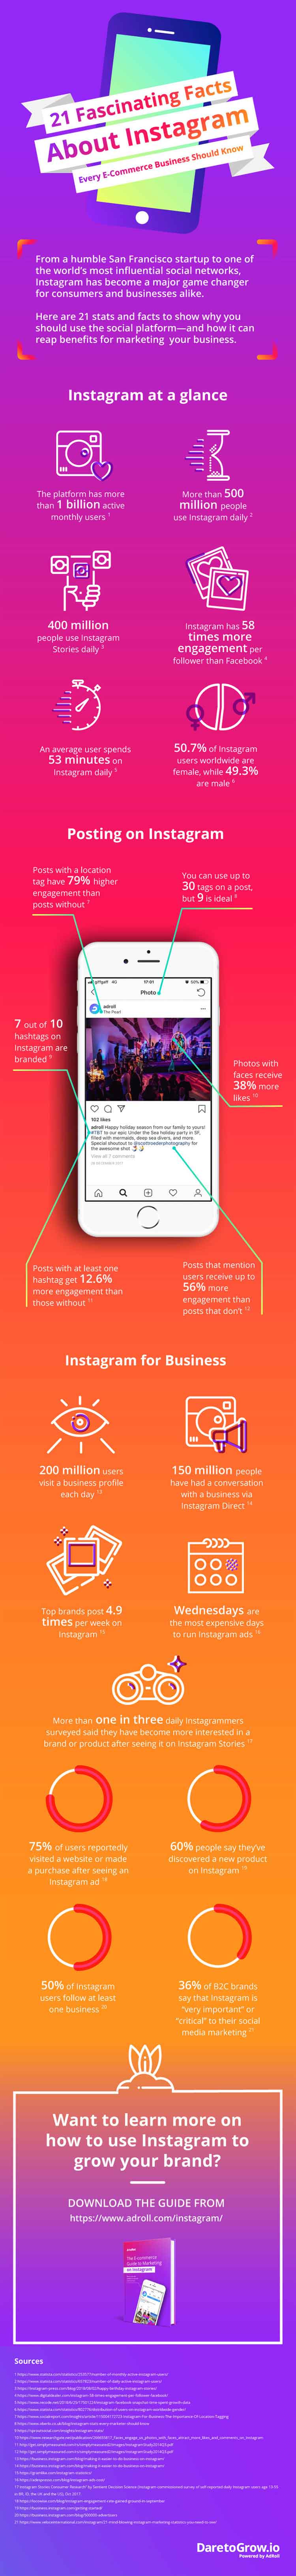 Instagram Facts That All eCommerce Businesses